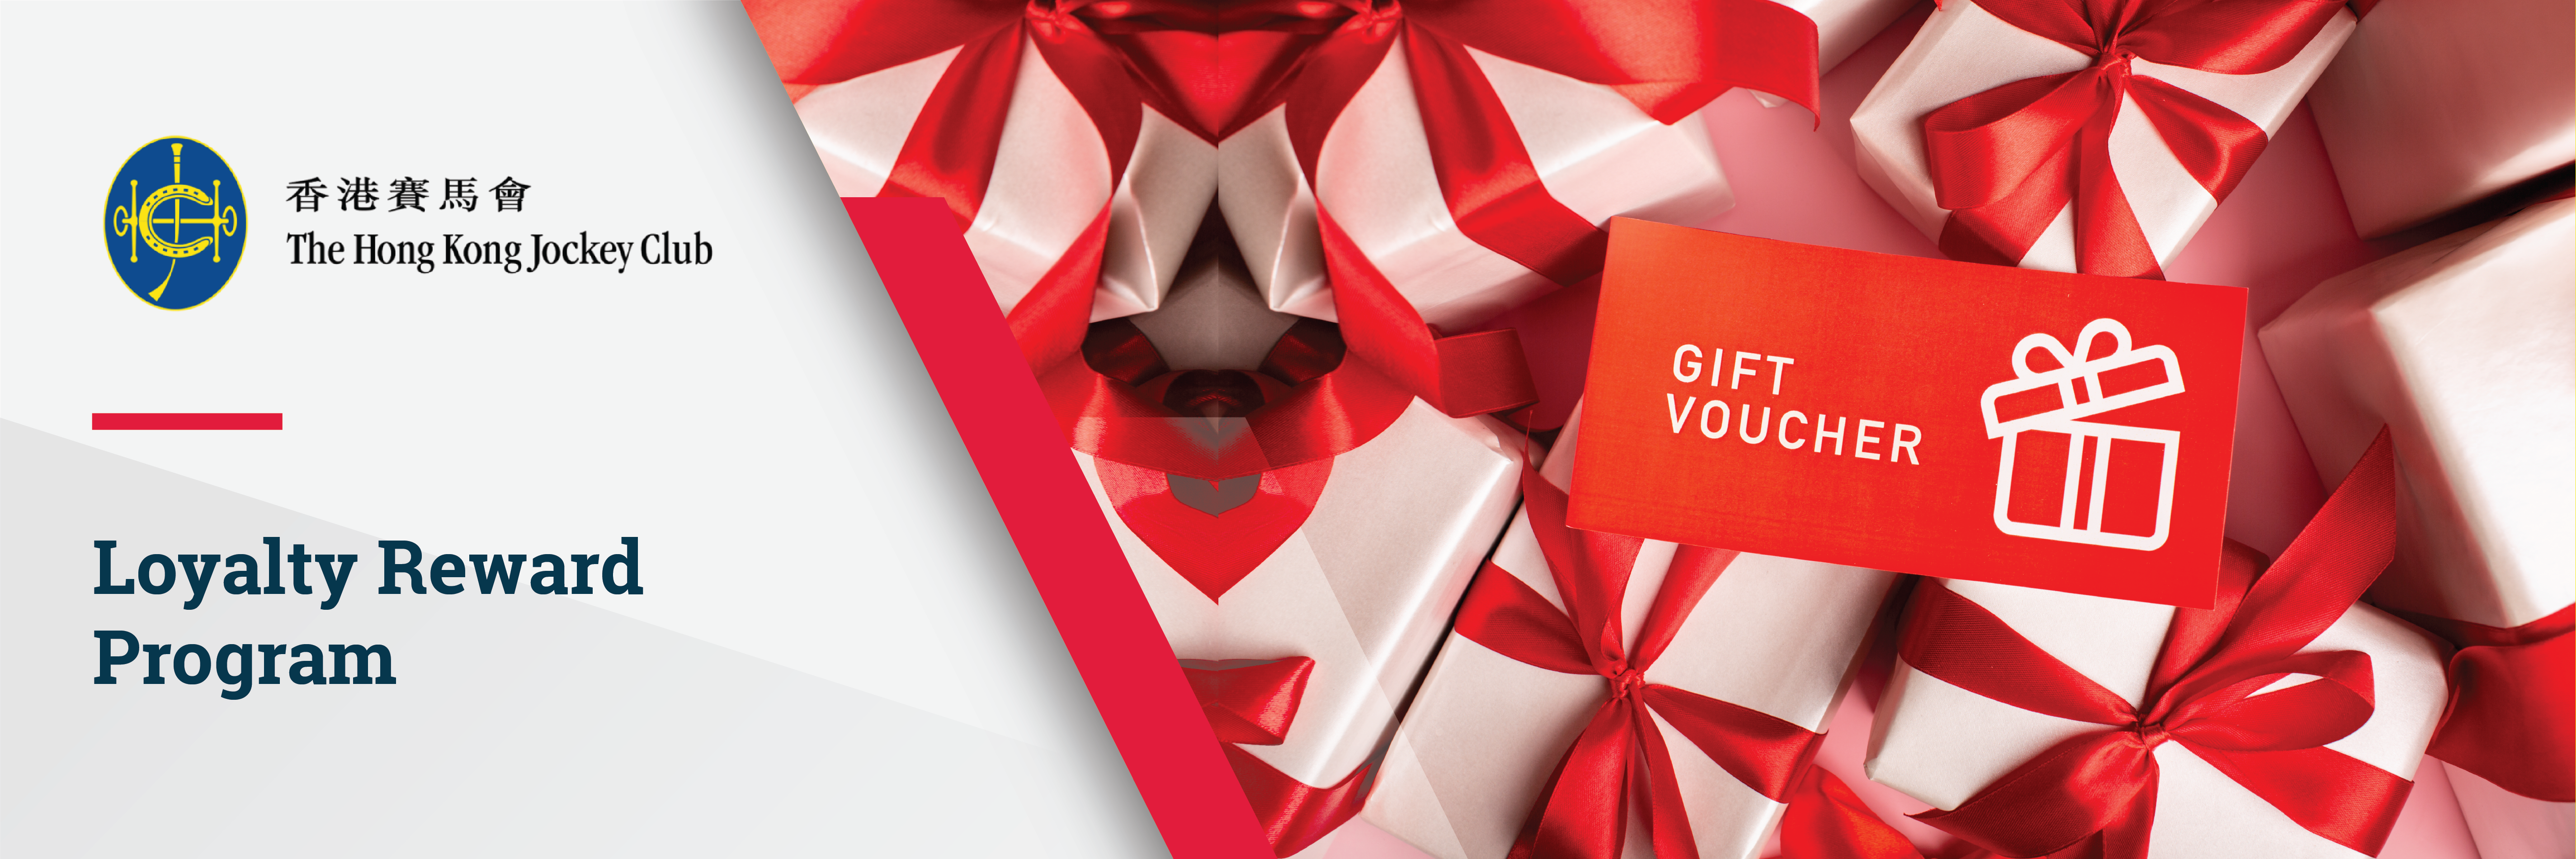 Gift voucher market remains an untapped sales segment and marketing  opportunity for venues and events